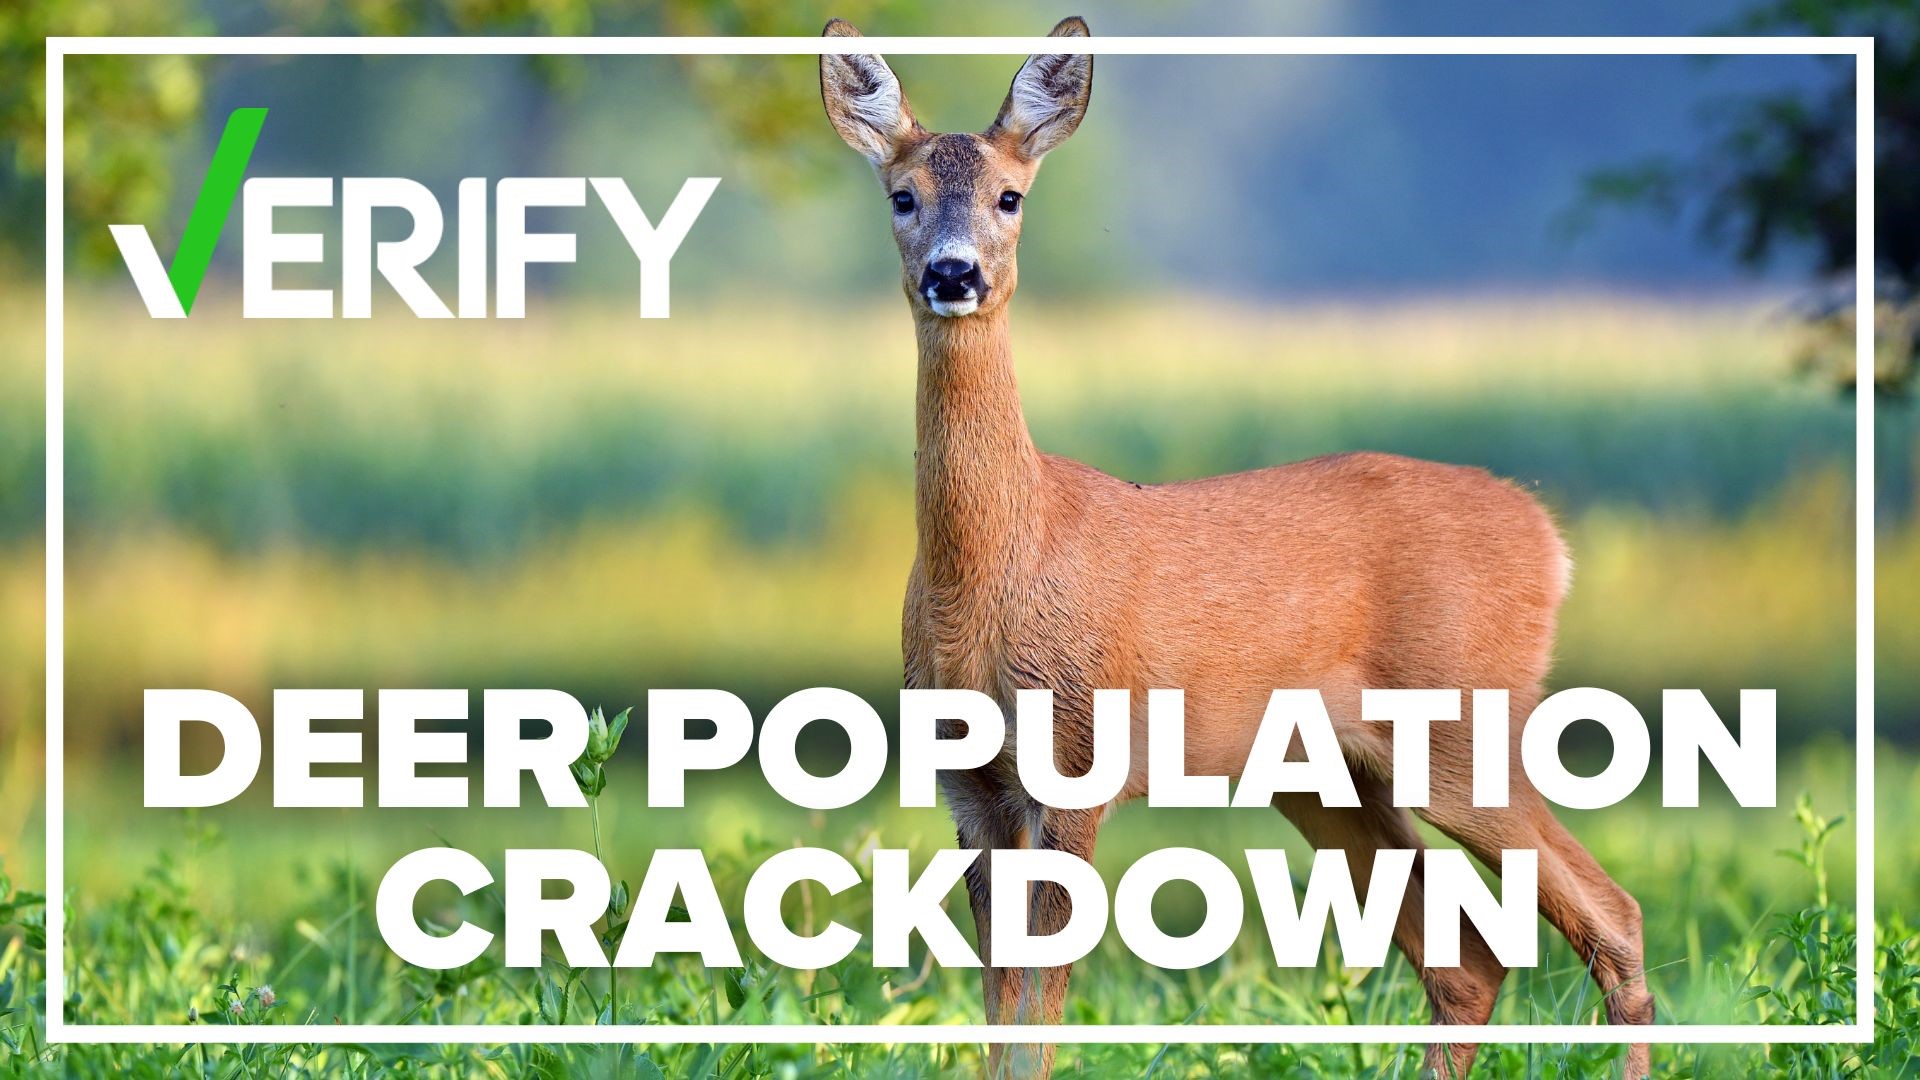 verify-south-carolina-town-cracking-down-on-deer-overpopulation